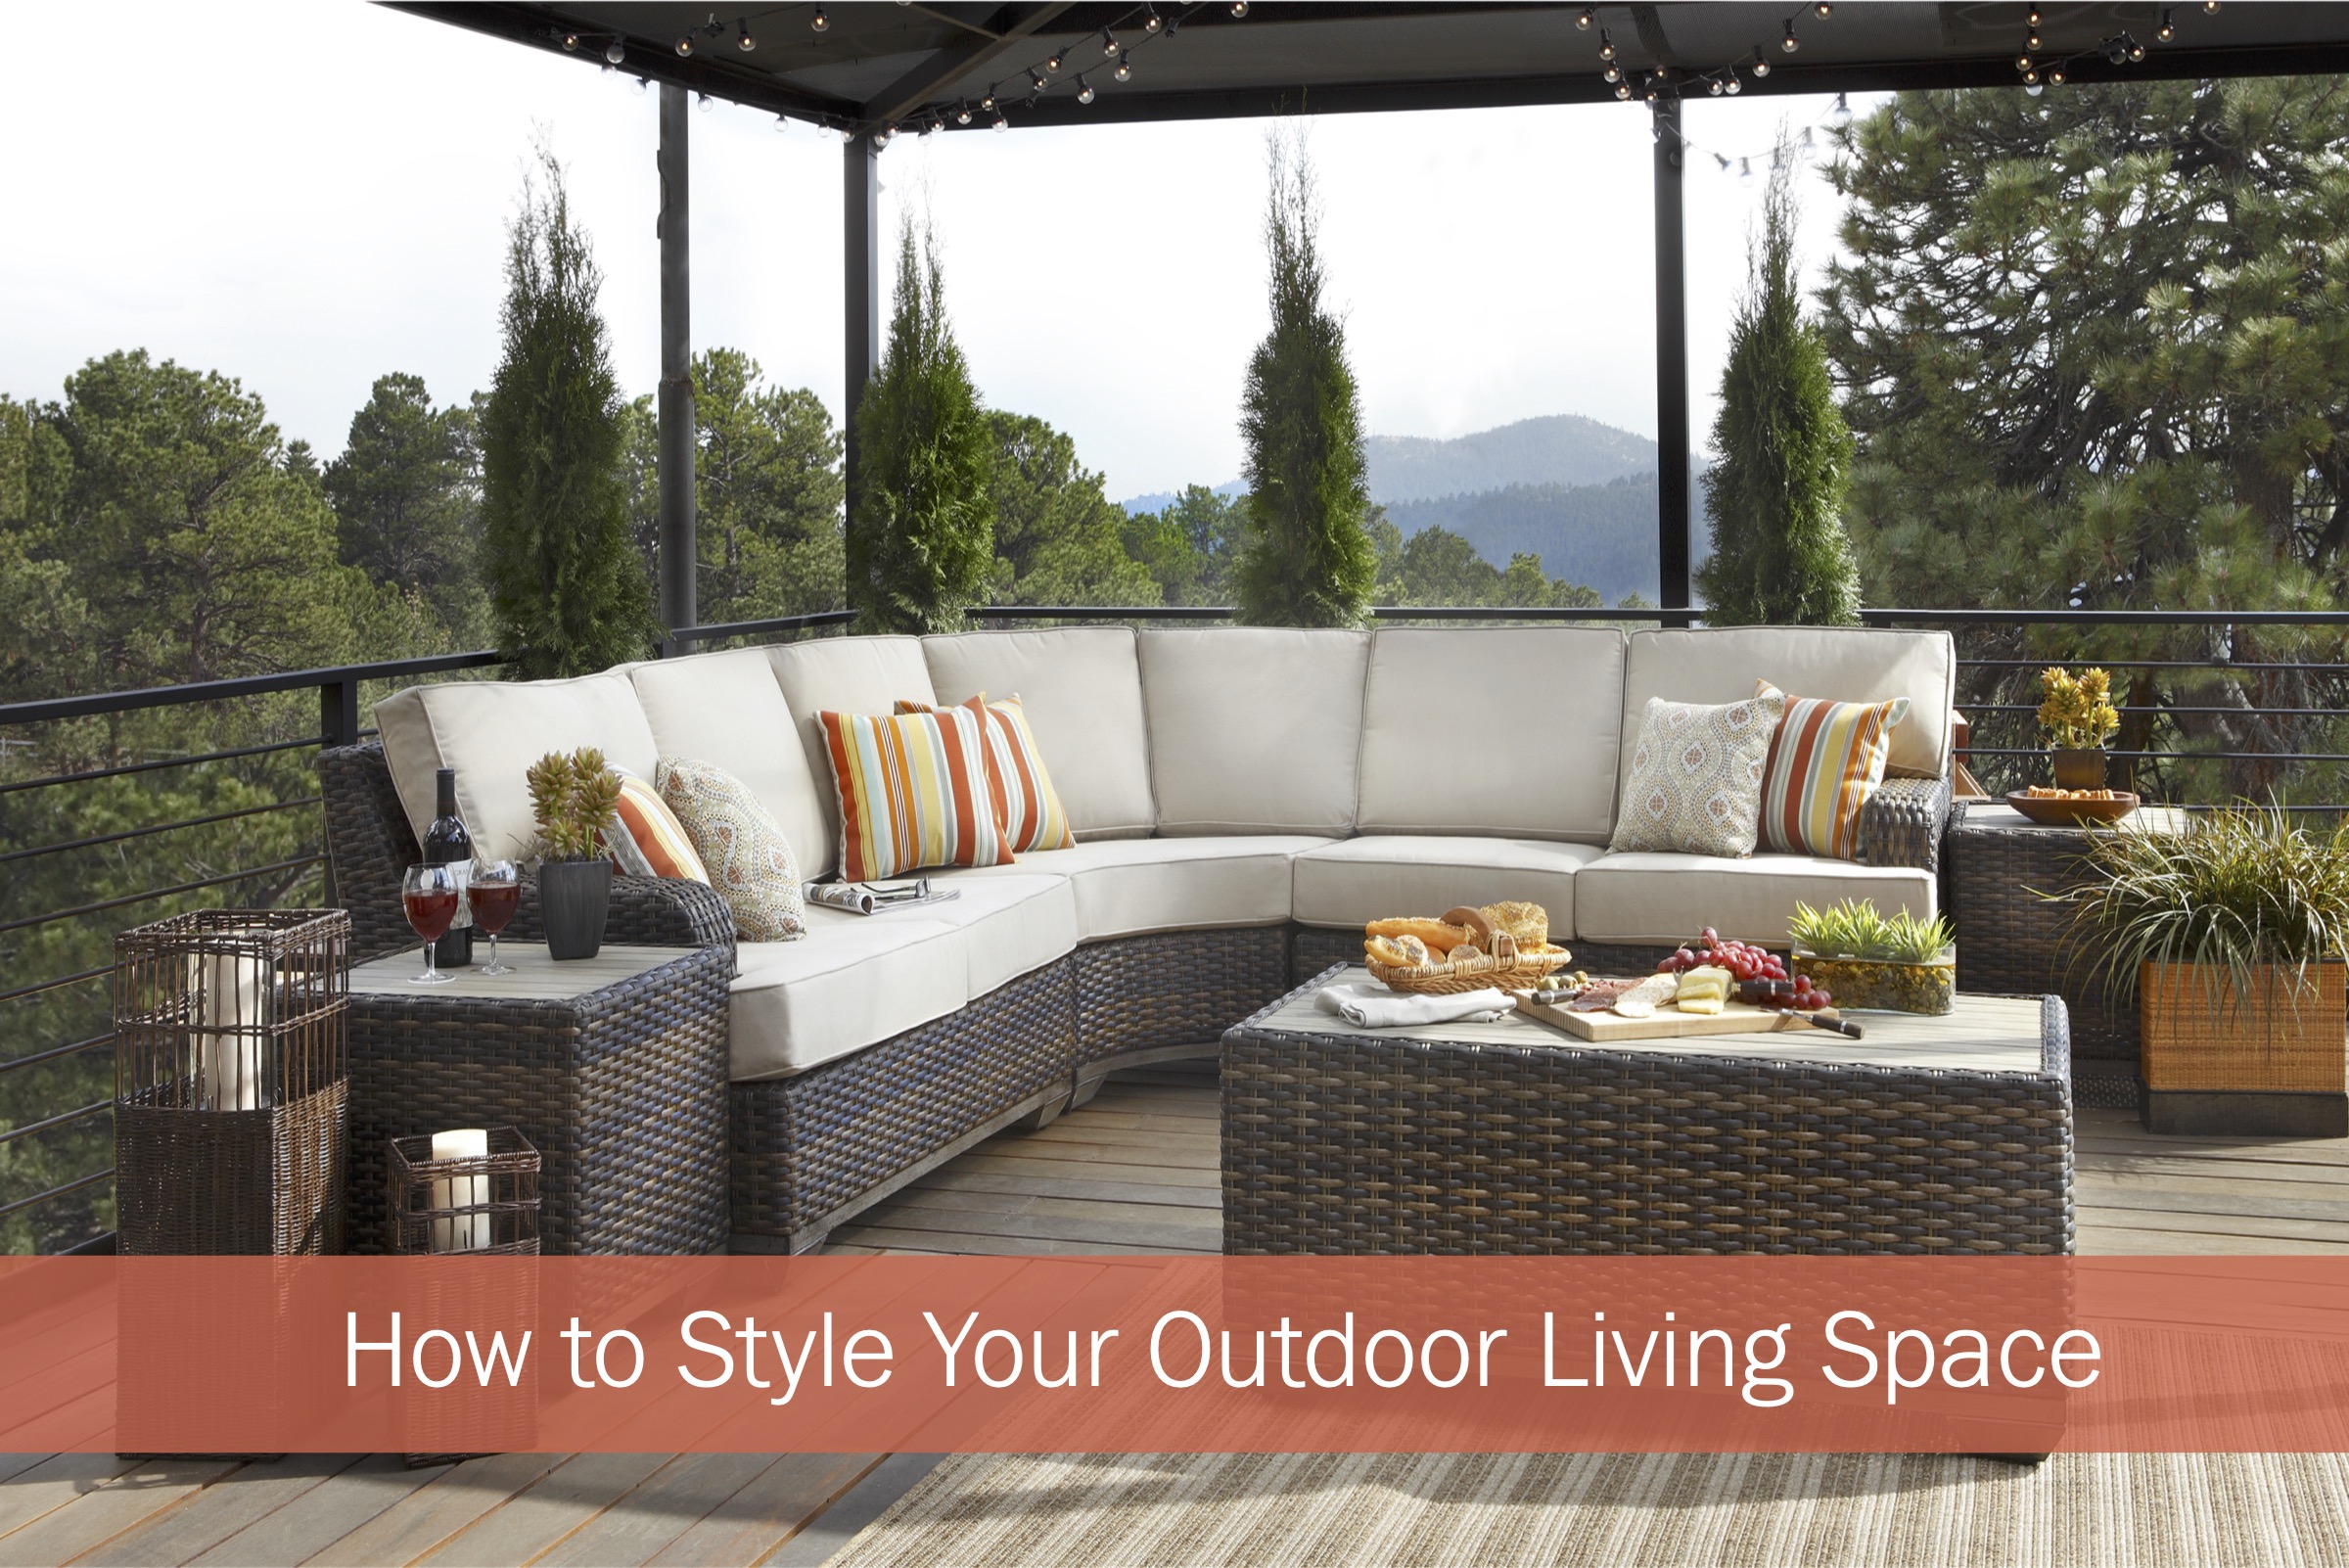 How to Style Your Outdoor Living Space